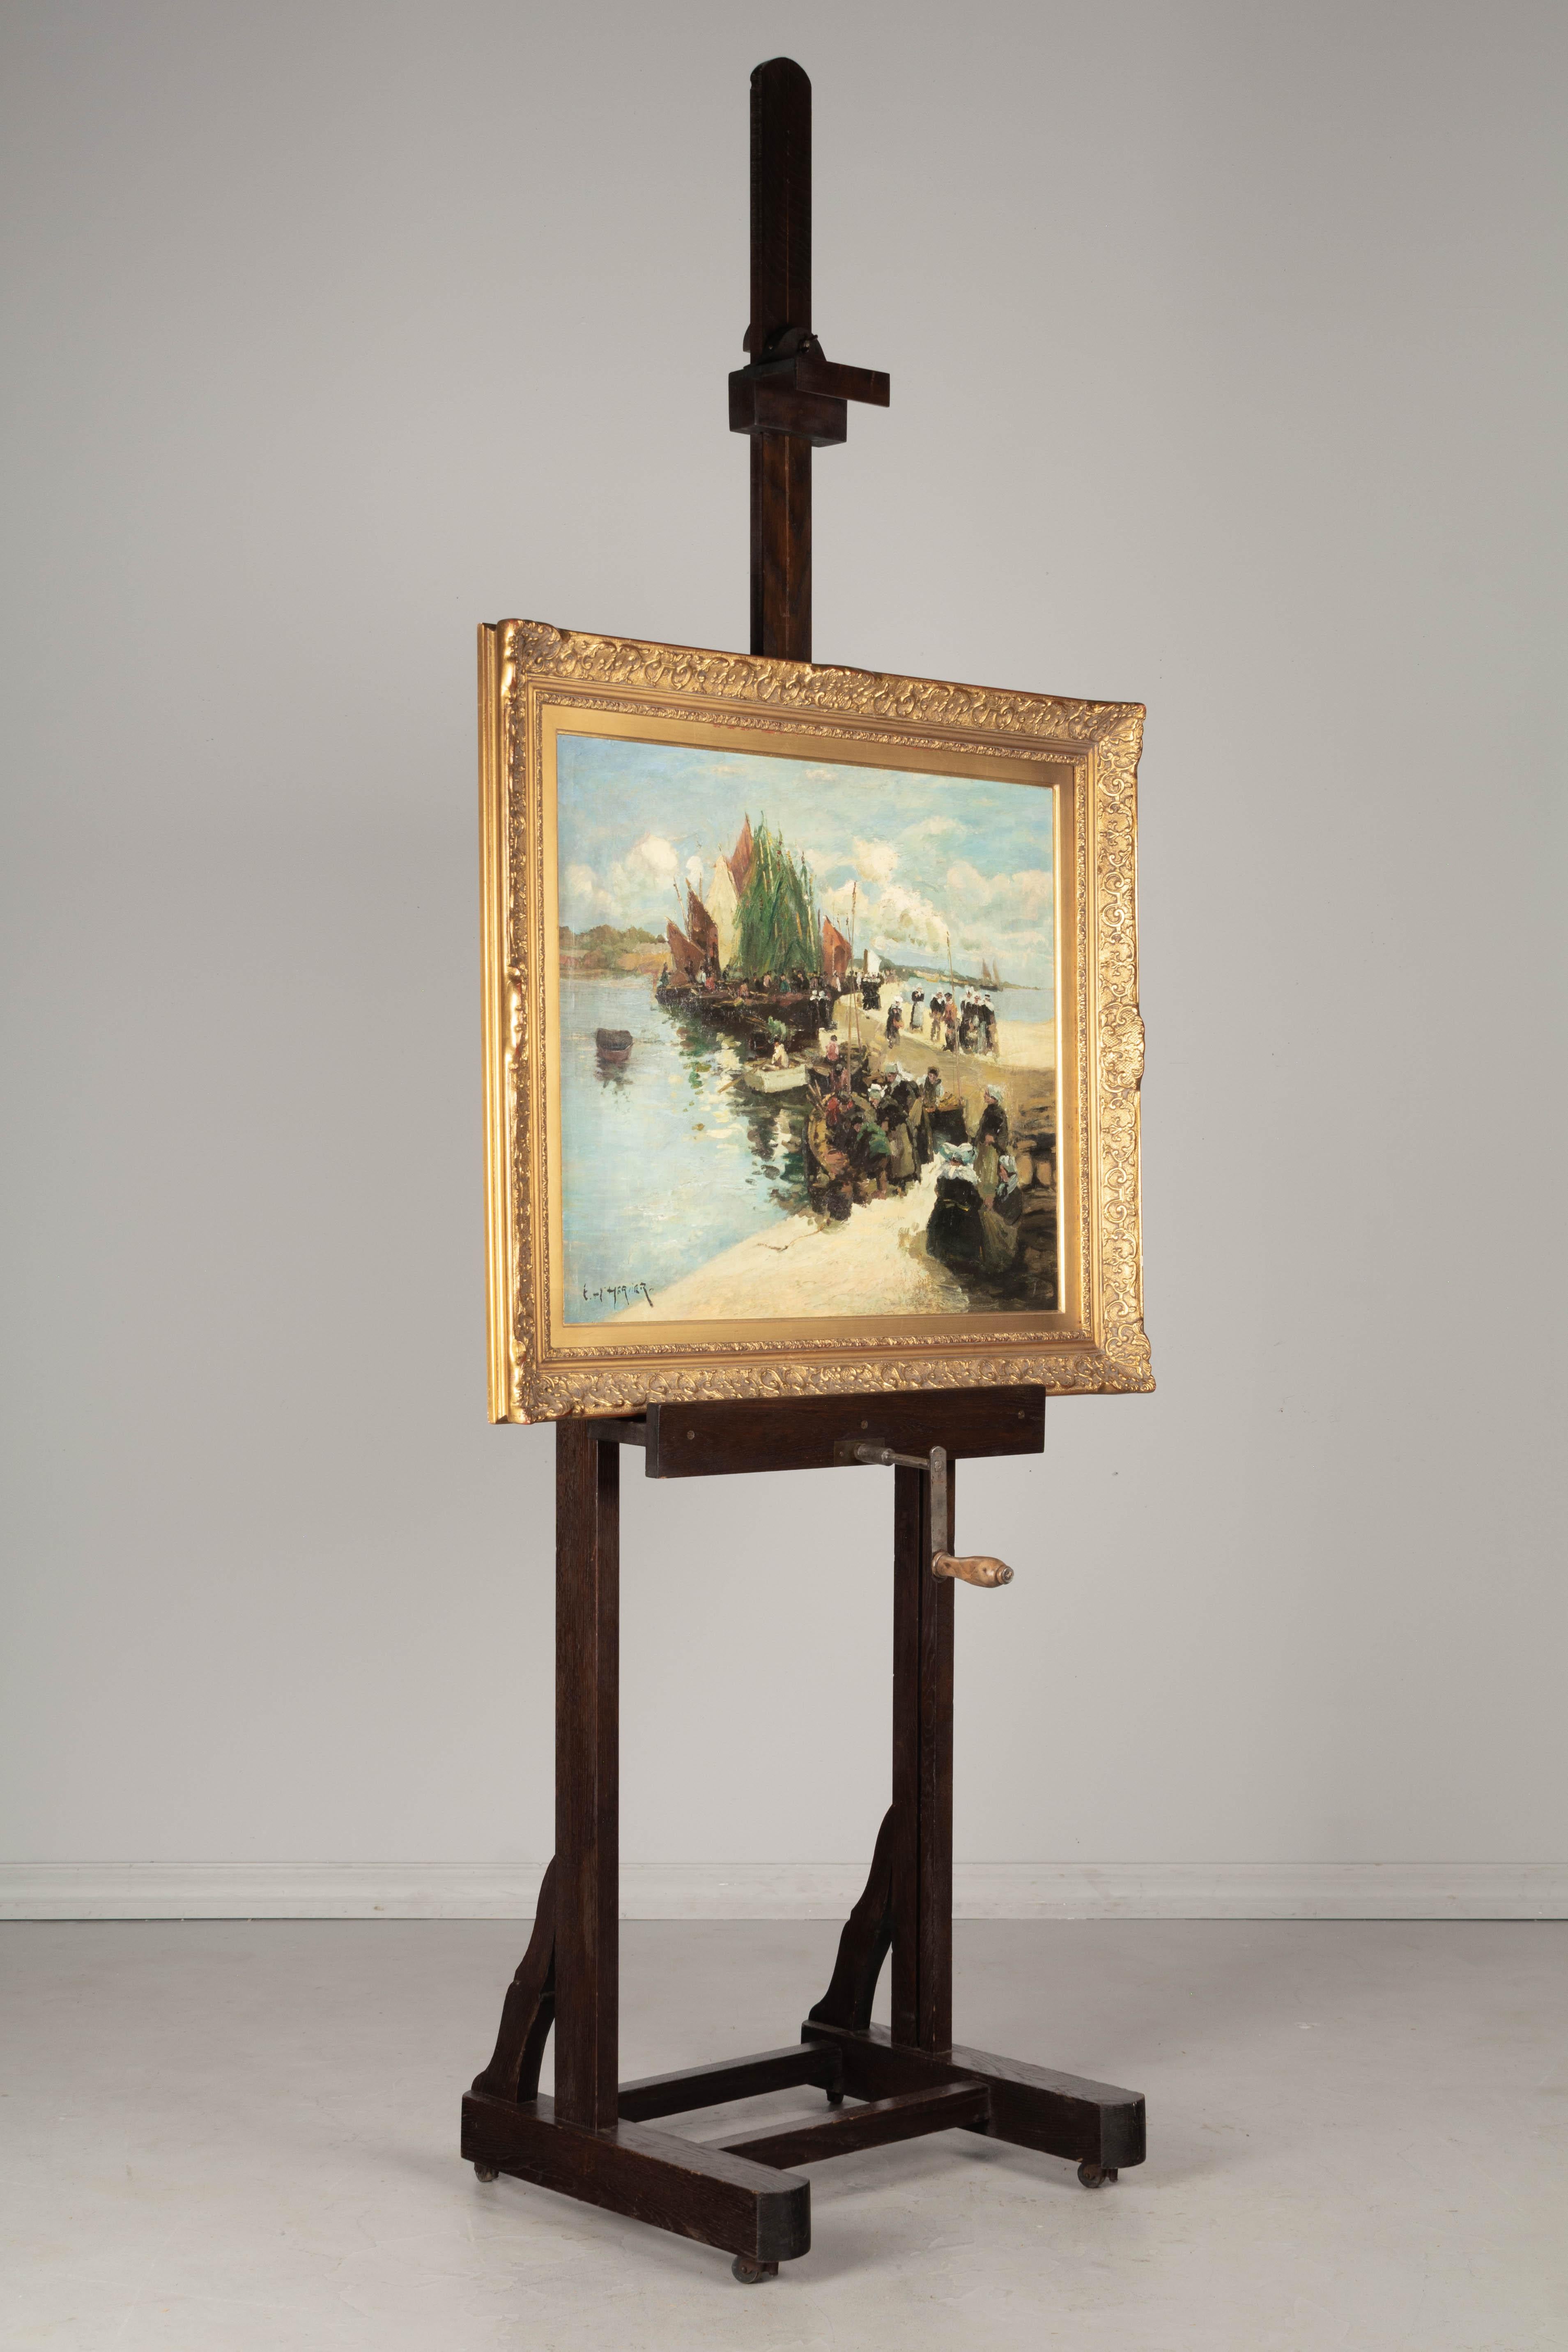 Cast French Chevalet or Painter's Easel